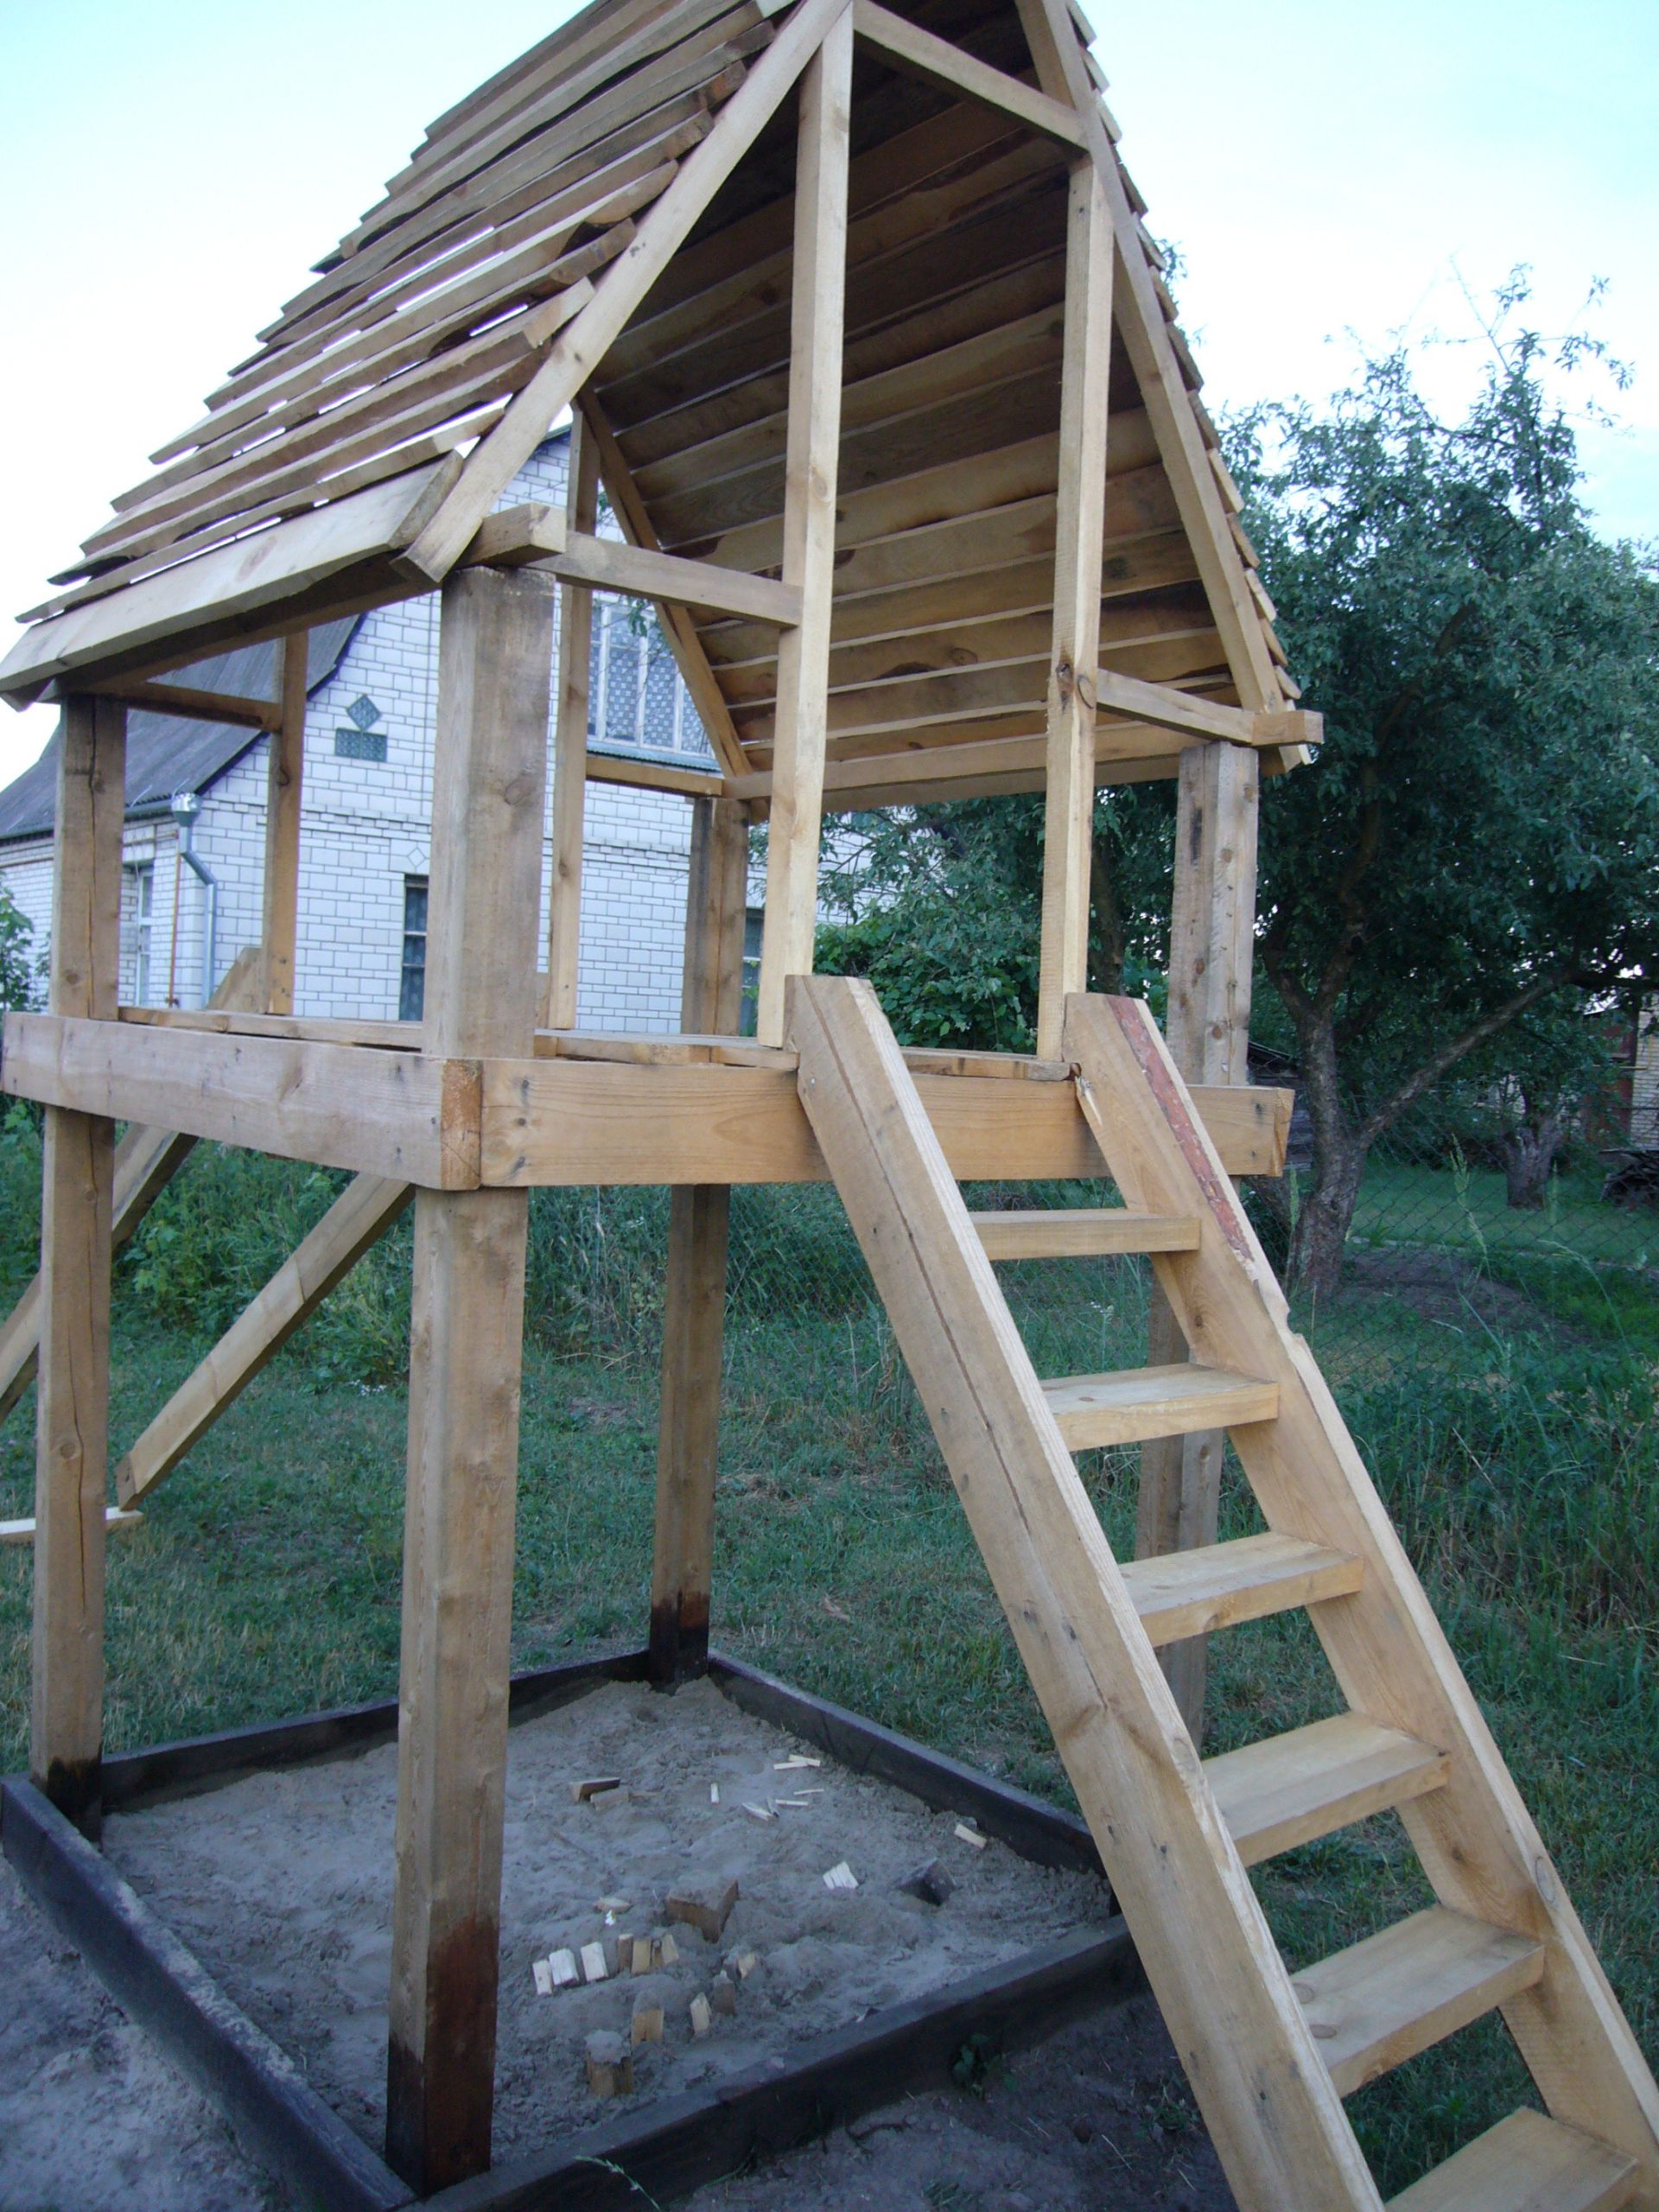 DIY Wood Playhouse
 DIY project wood playhouse with slide